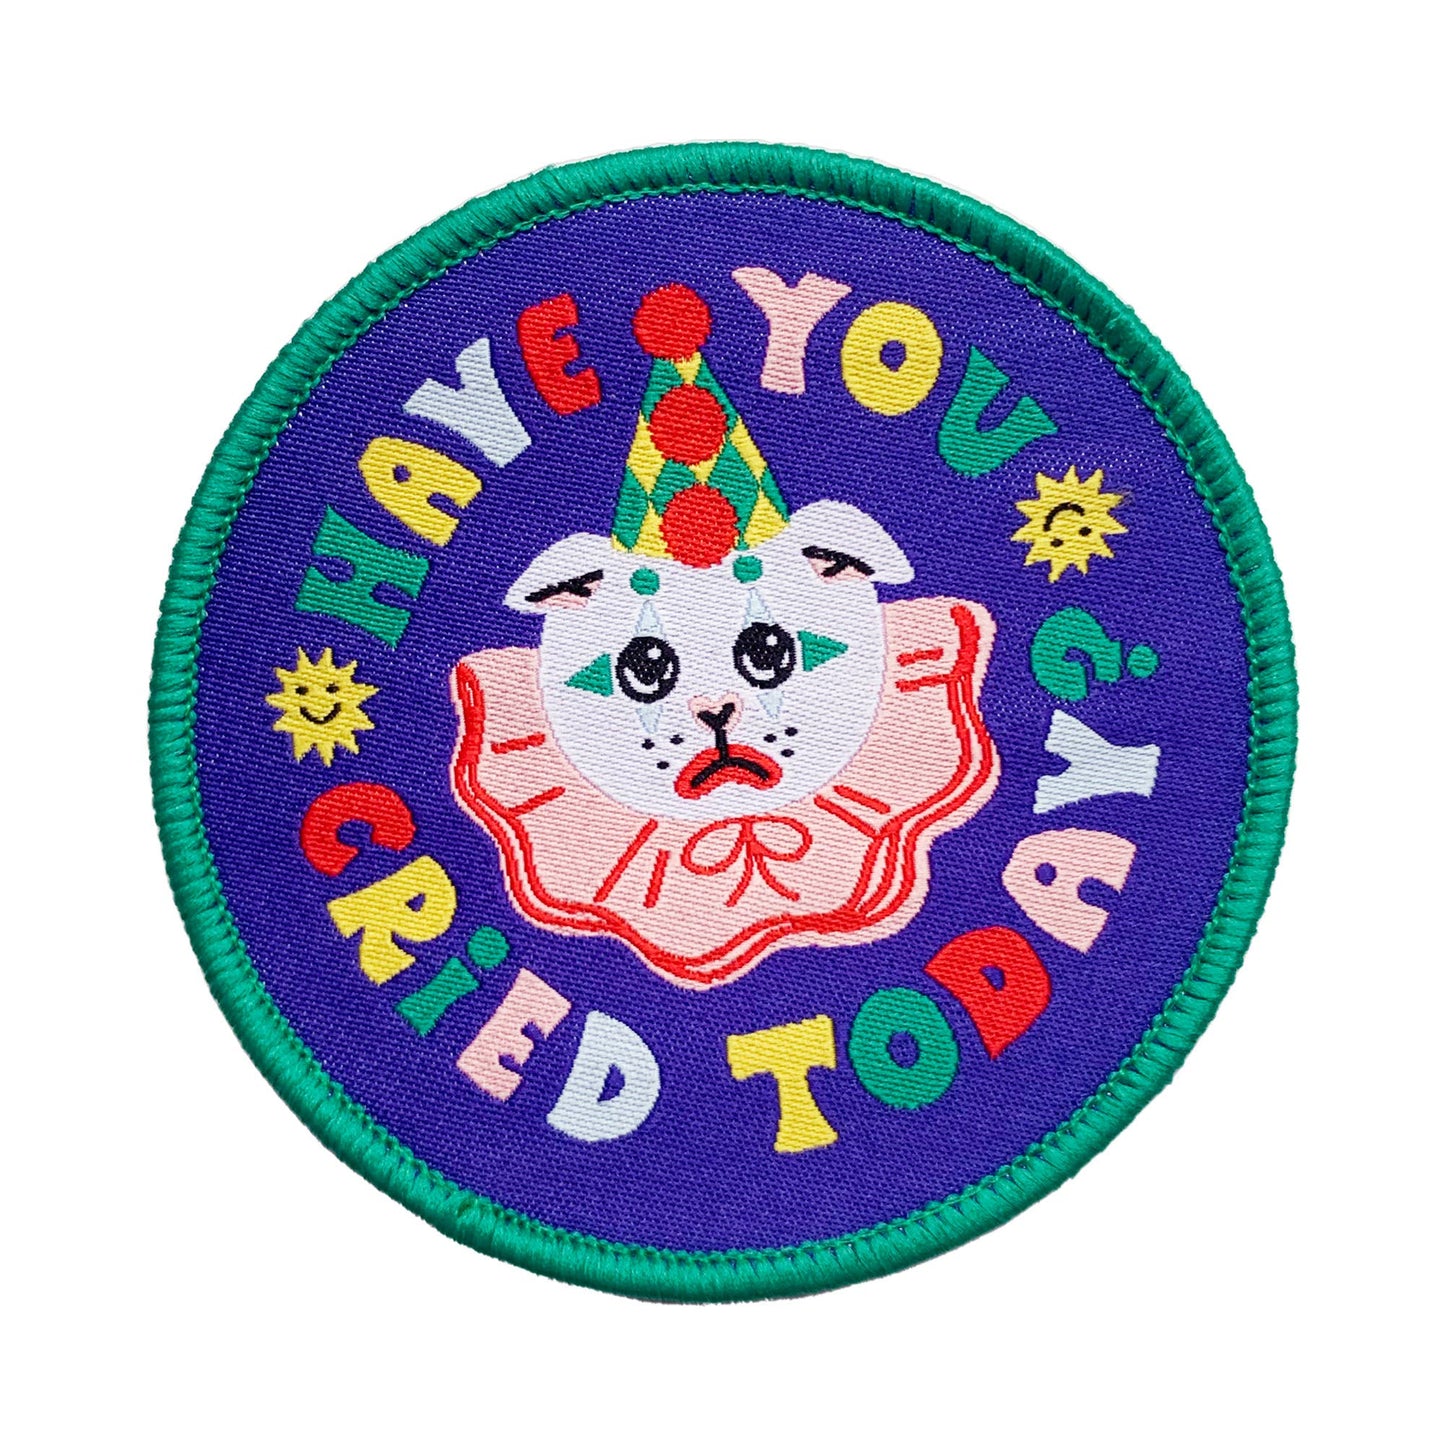 Have You Cried Today? Clown Cat Iron-On Patch